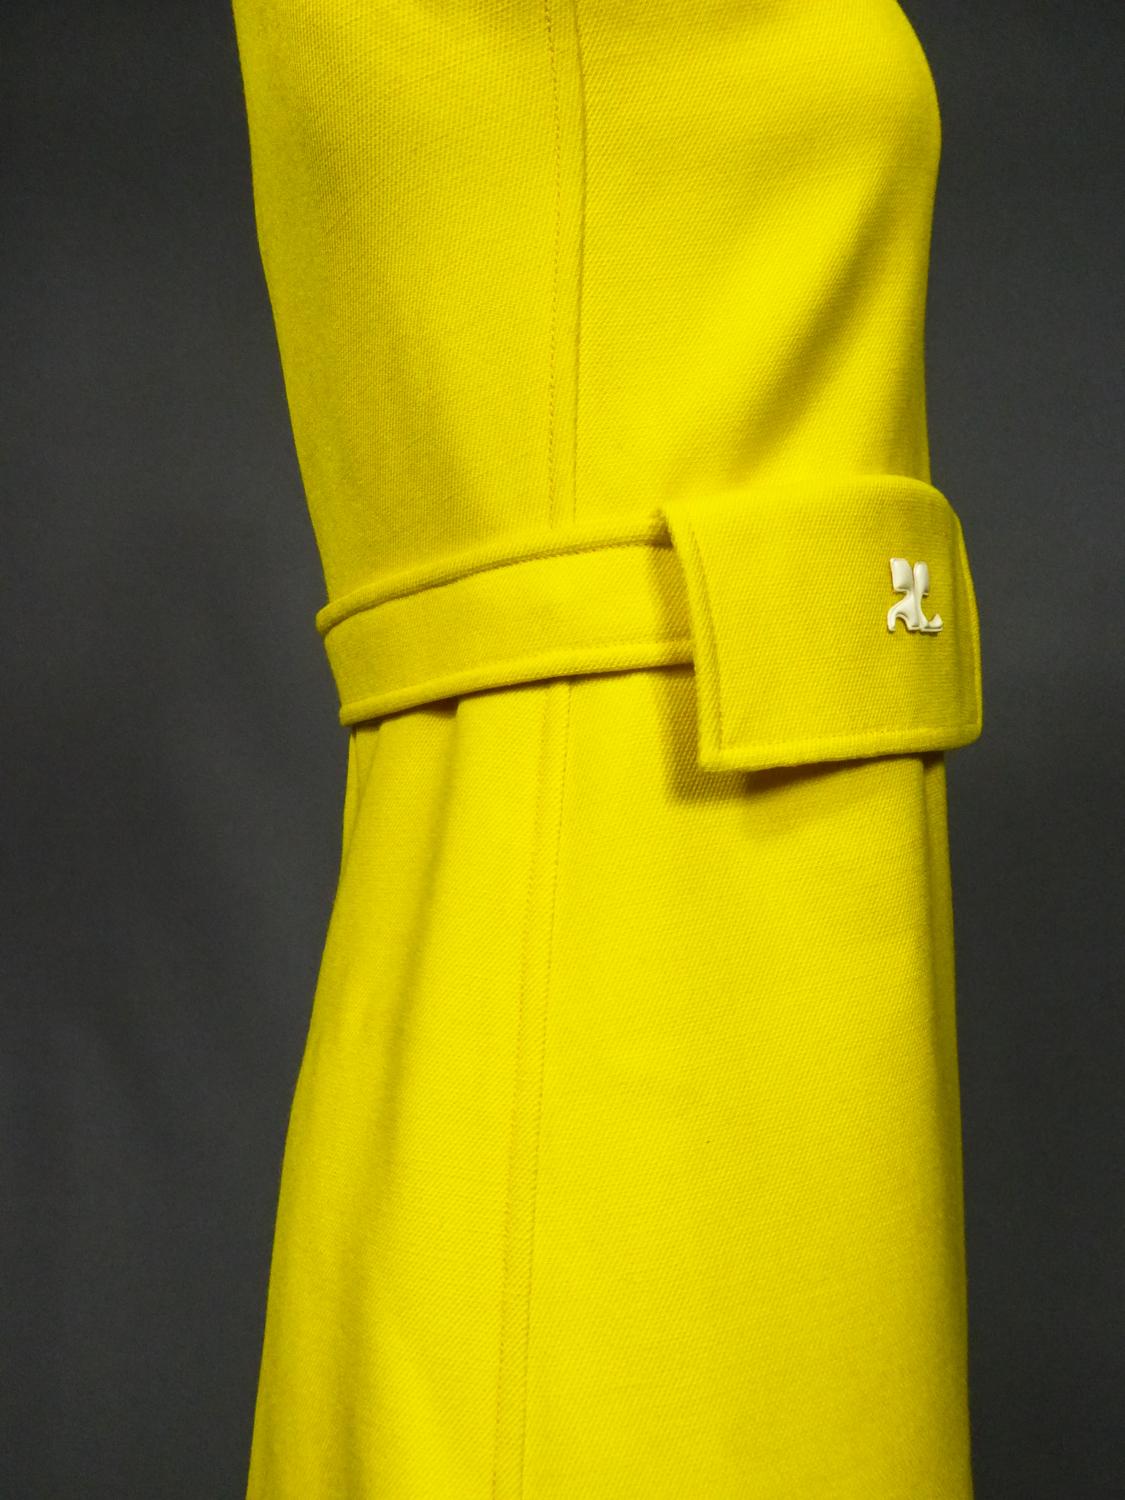 A Chasuble Mini Dress André Courrèges Haute Couture n° 102322 French Circa 1968 5